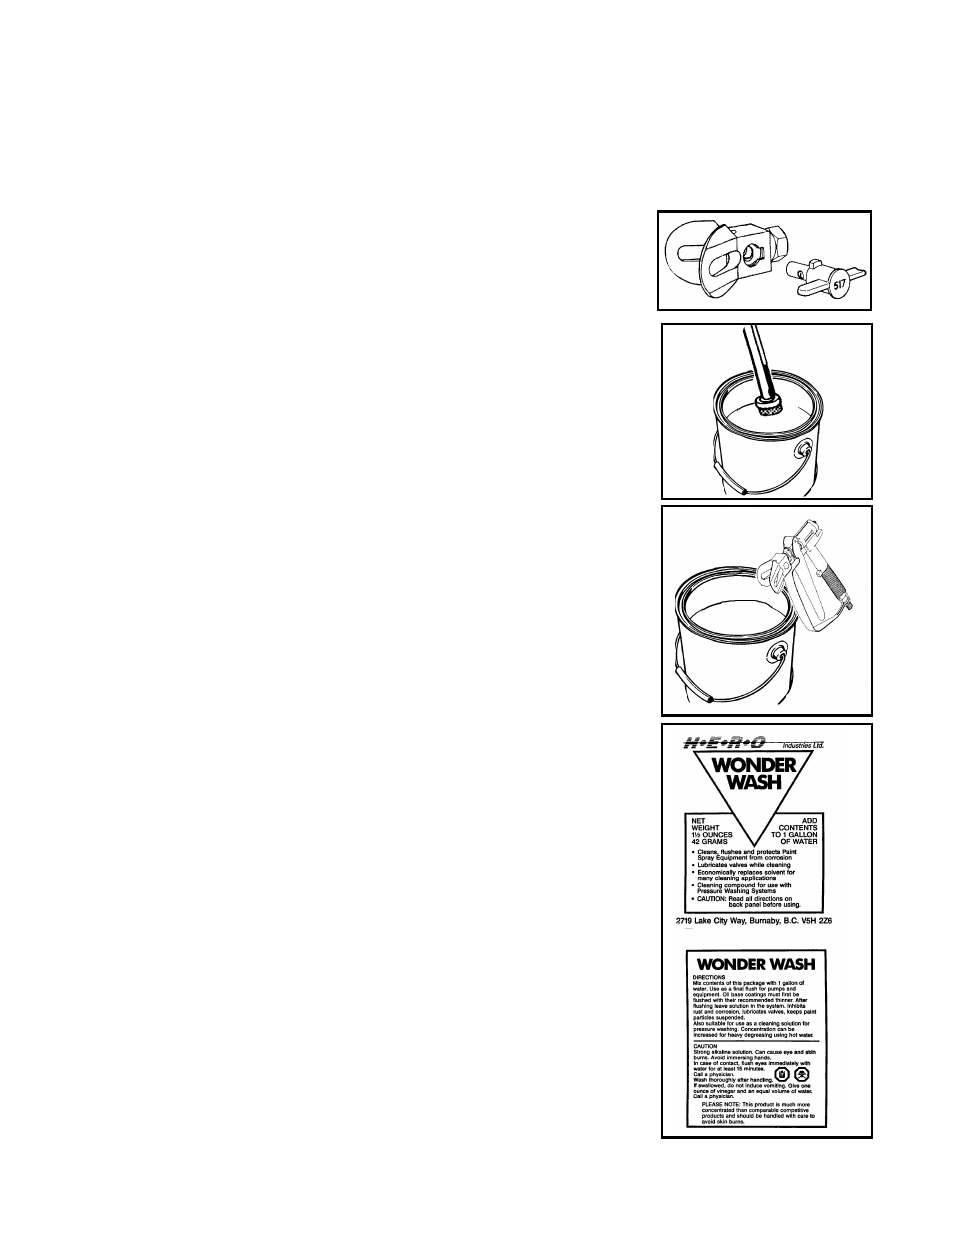 Flushing the unit at shutdown or color change | I.C.T.C. Holdings Corporation 300S Legend User Manual | Page 8 / 39